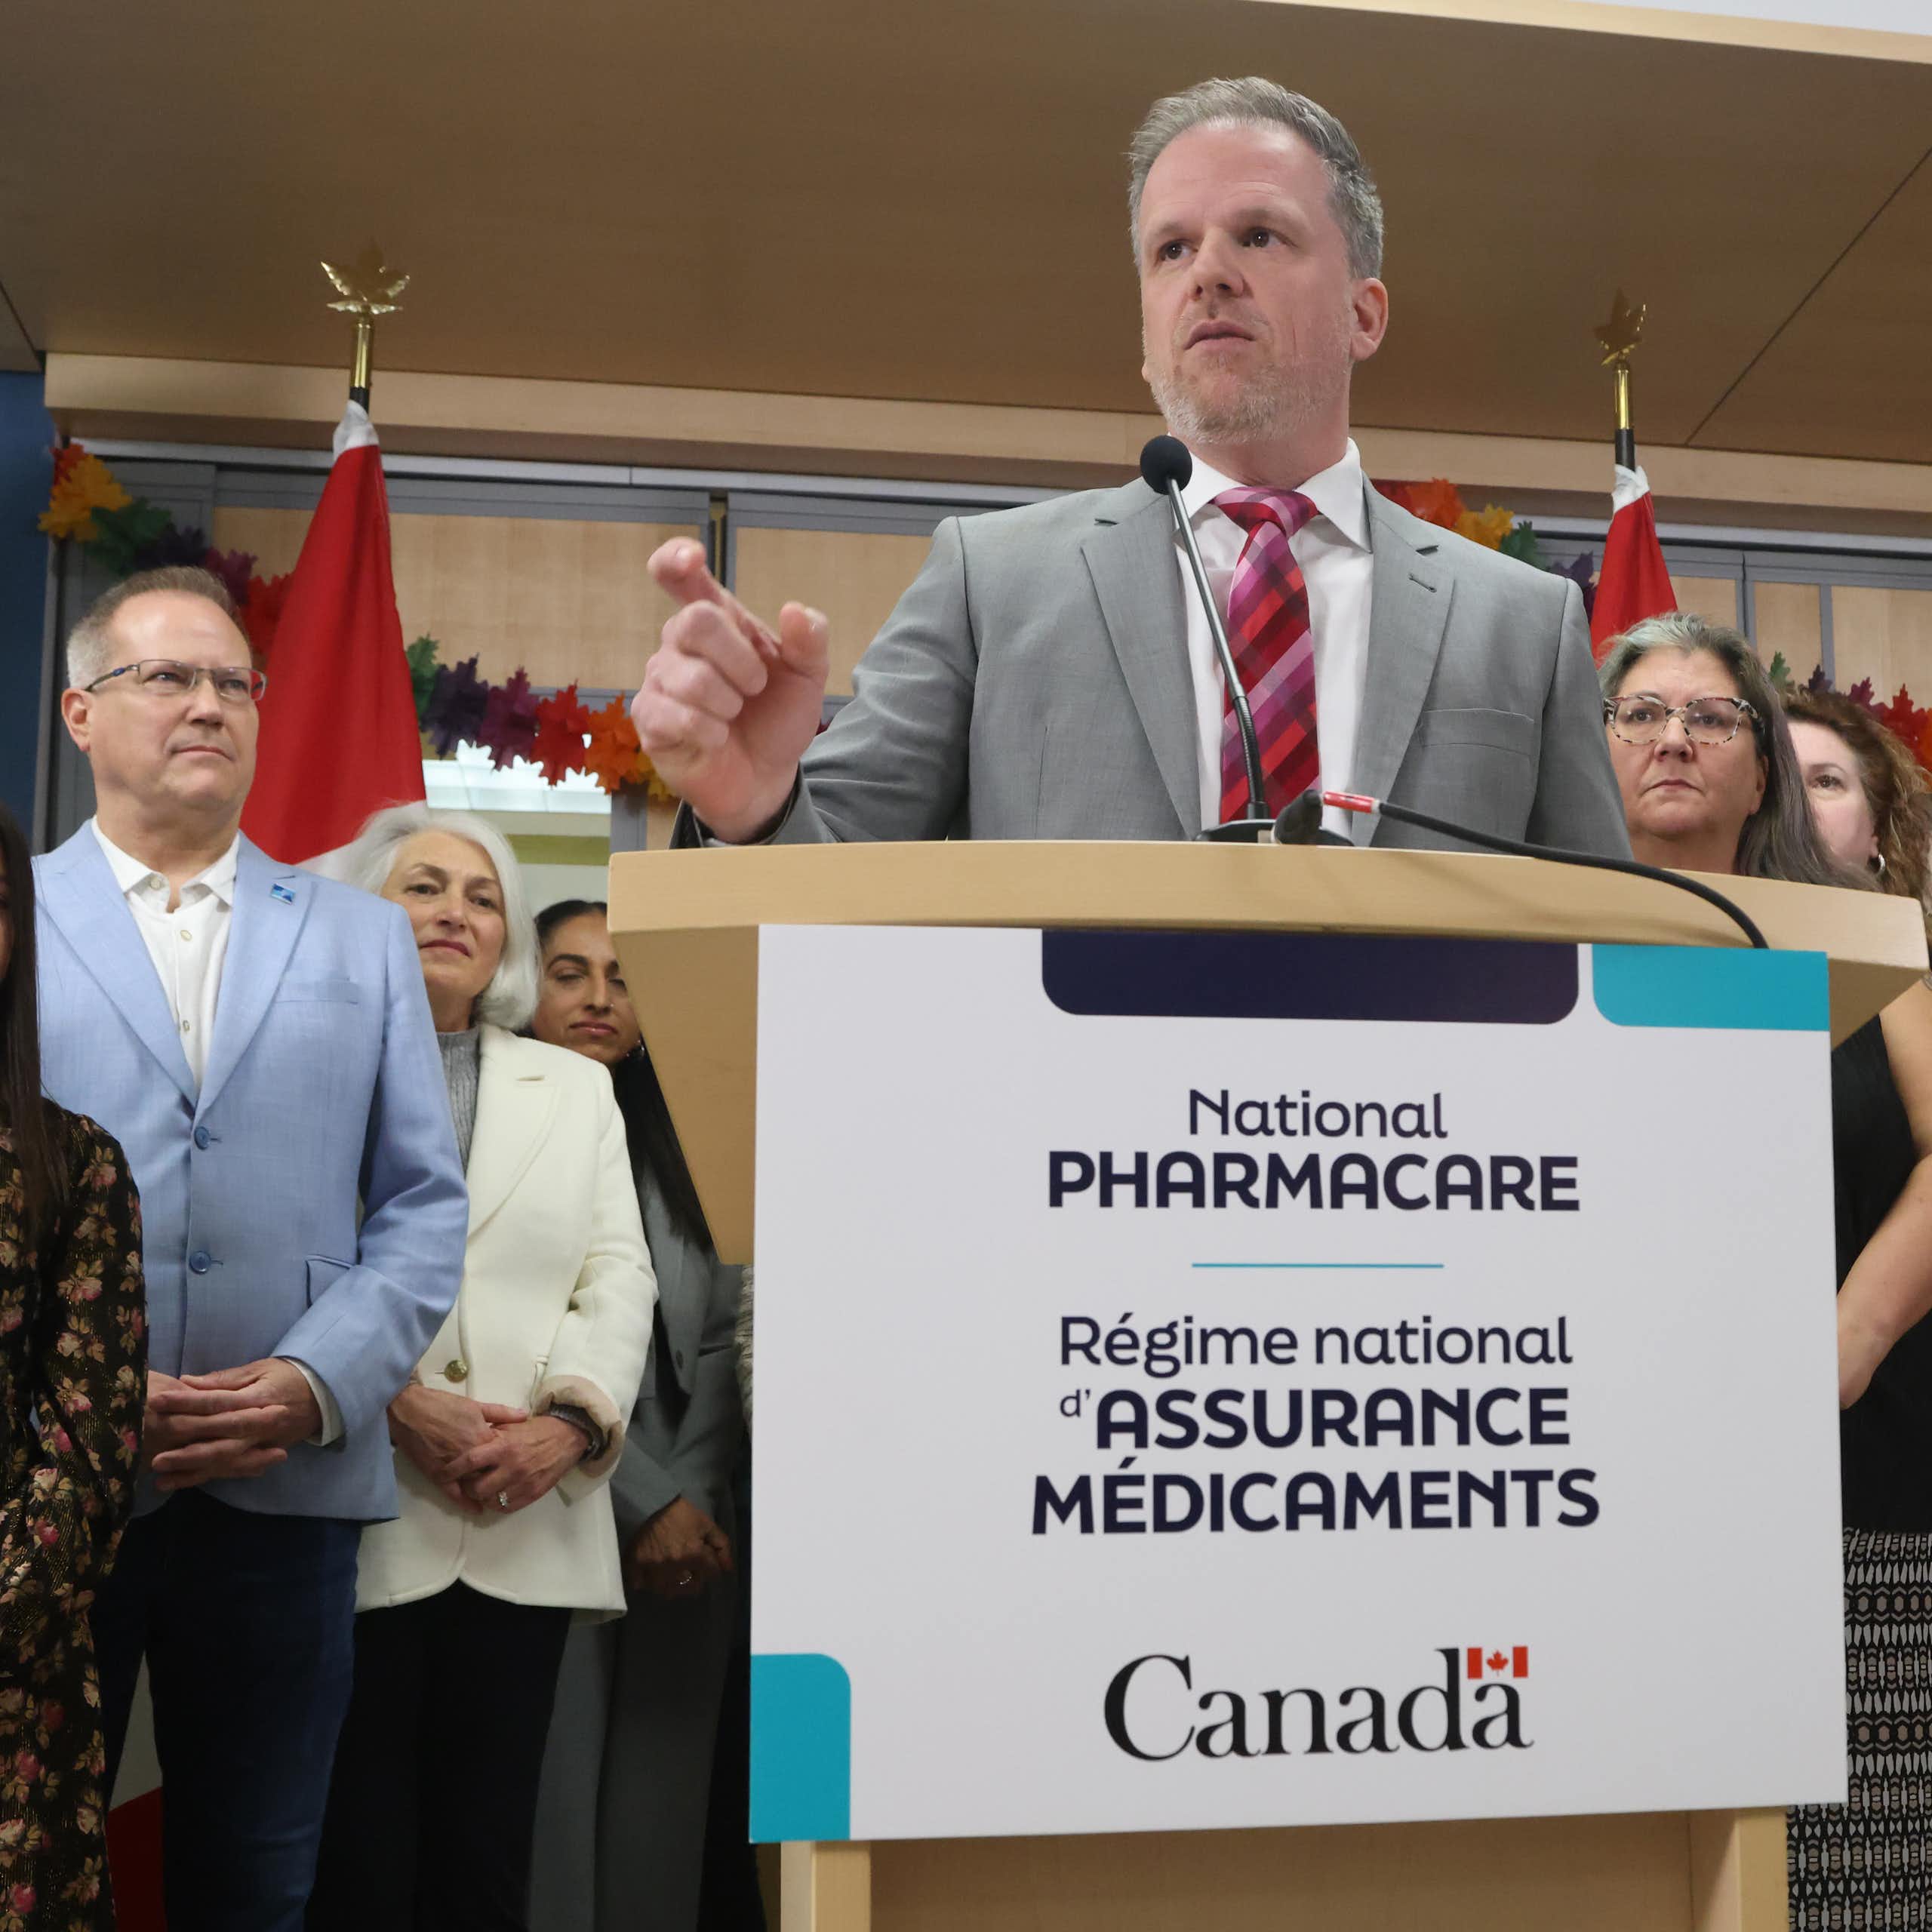 A man in a gray suit standing at a podium marked National Pharmacare